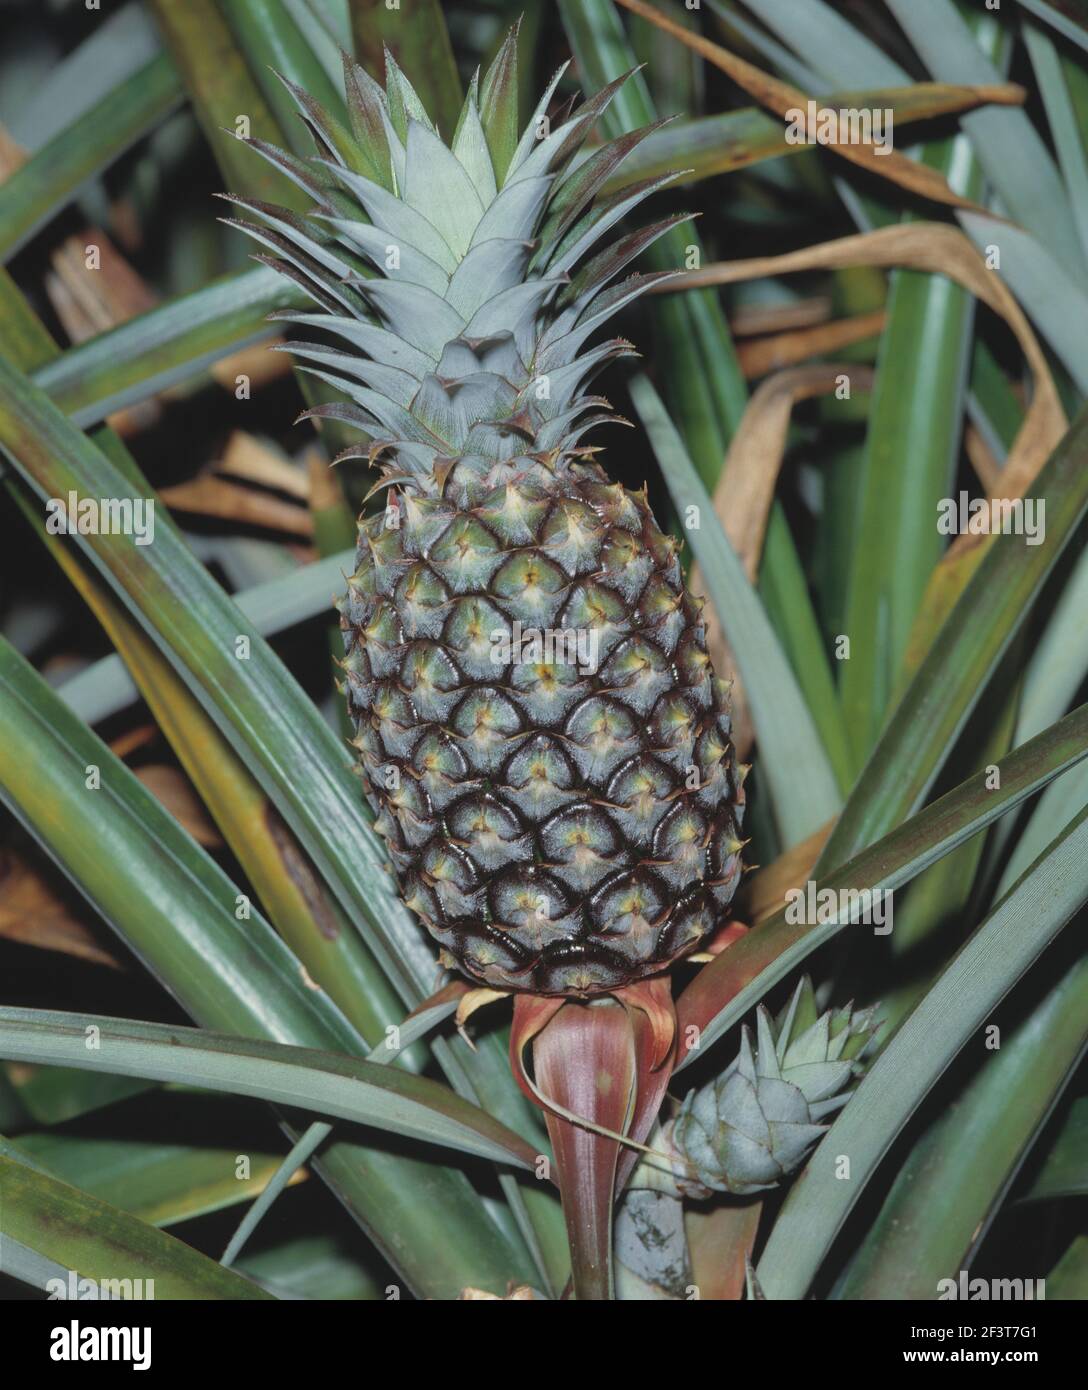 Agriculture. Fruit. Growing pineapple. (Ananas comosus). Stock Photo